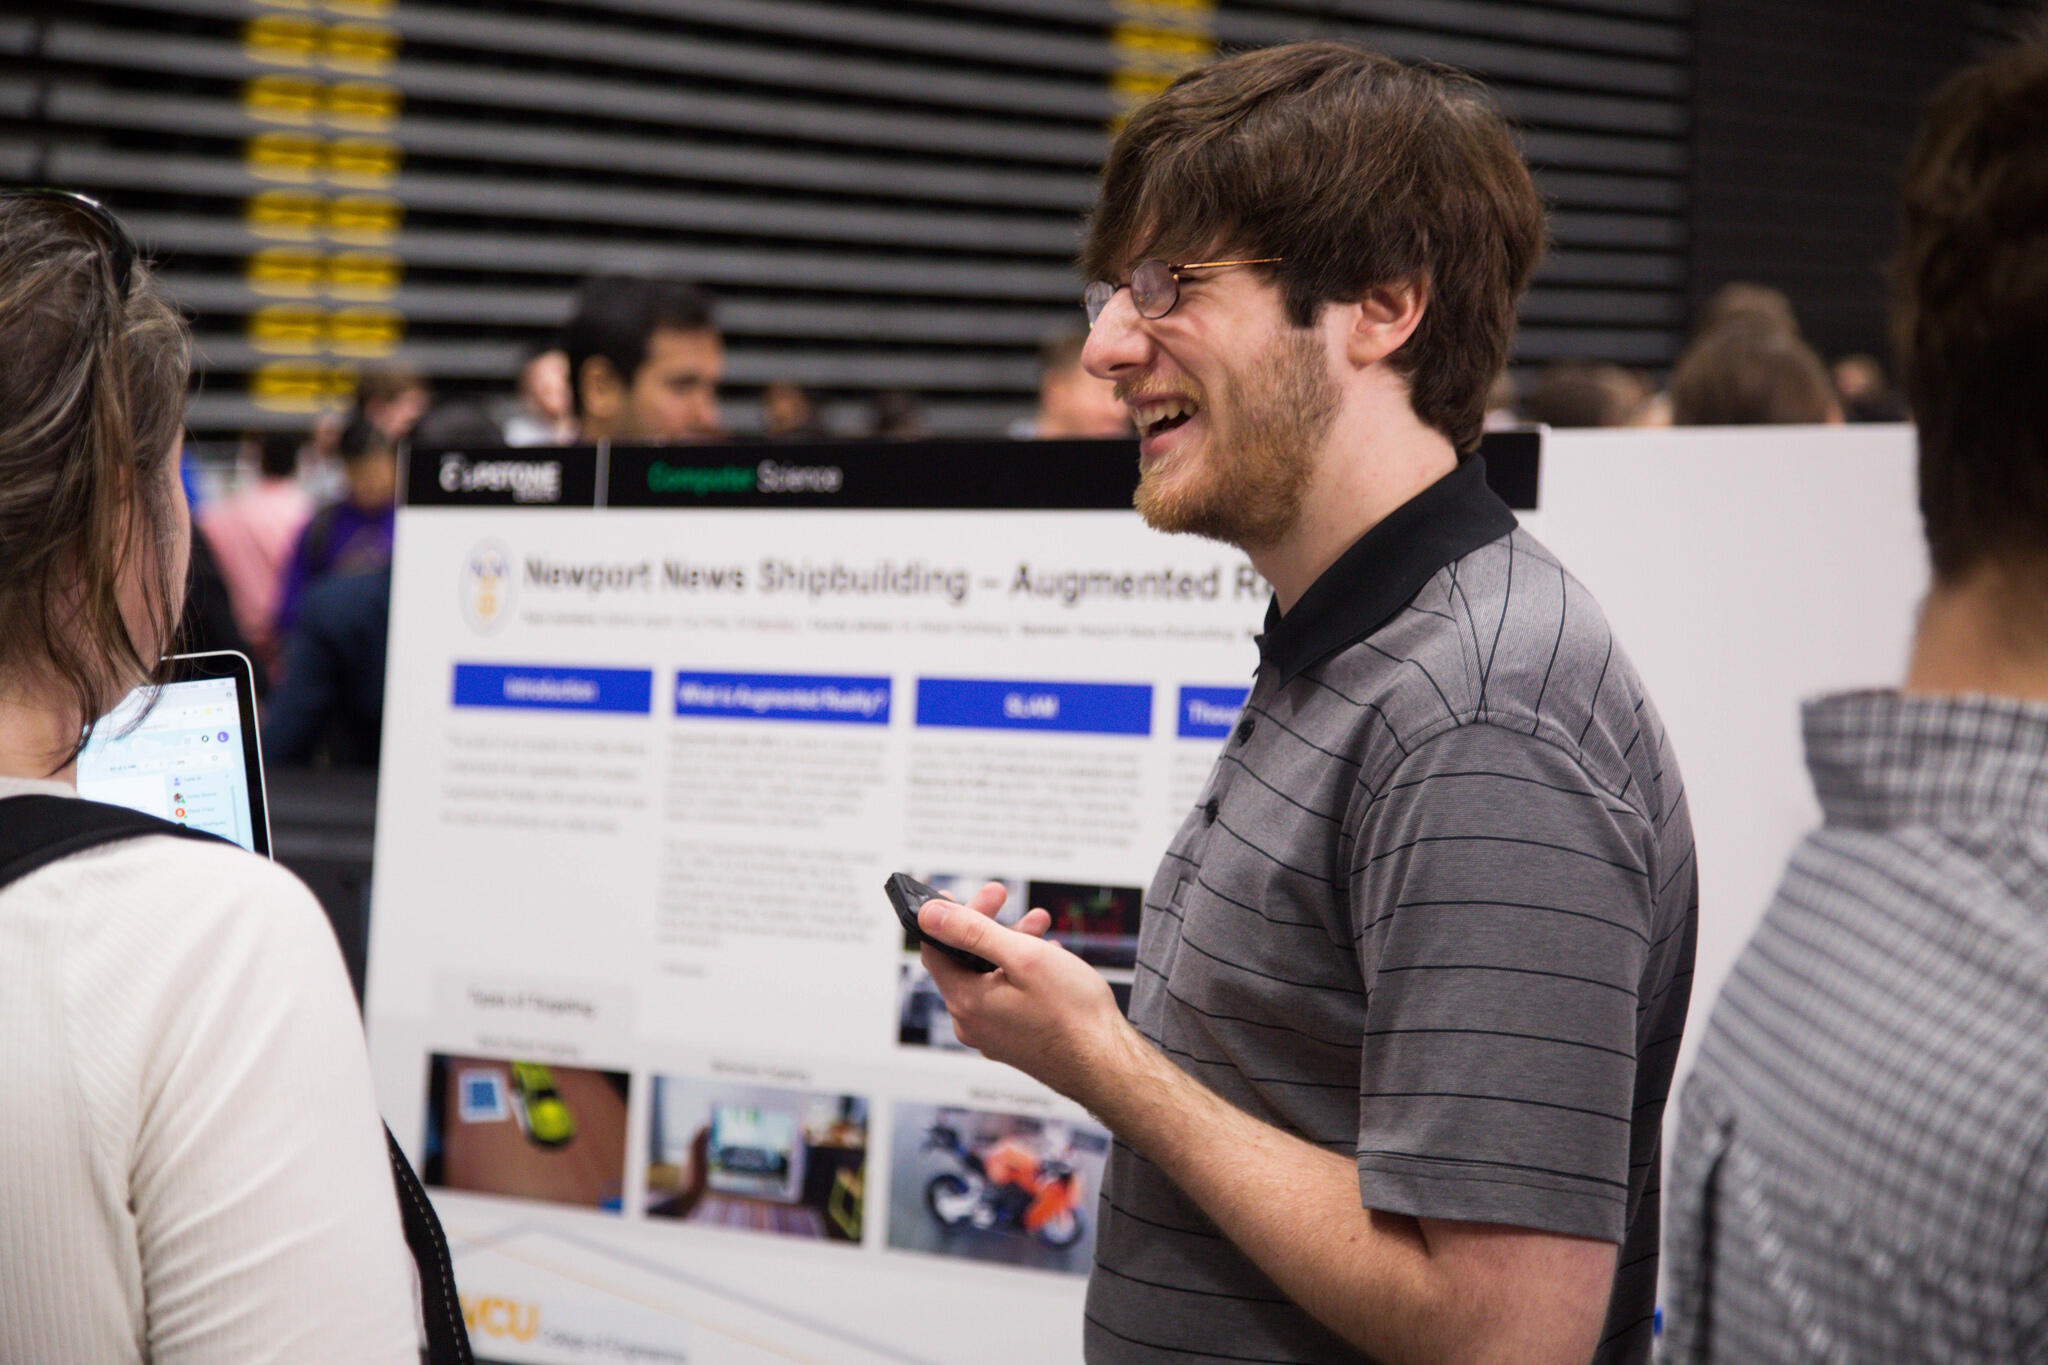 Recent Computer Science graduate Nathaniel Ingram discusses the augmented reality app that his team developed at the 2018 Capstone Design Expo. (Photos courtesy of VCU College of Engineering)